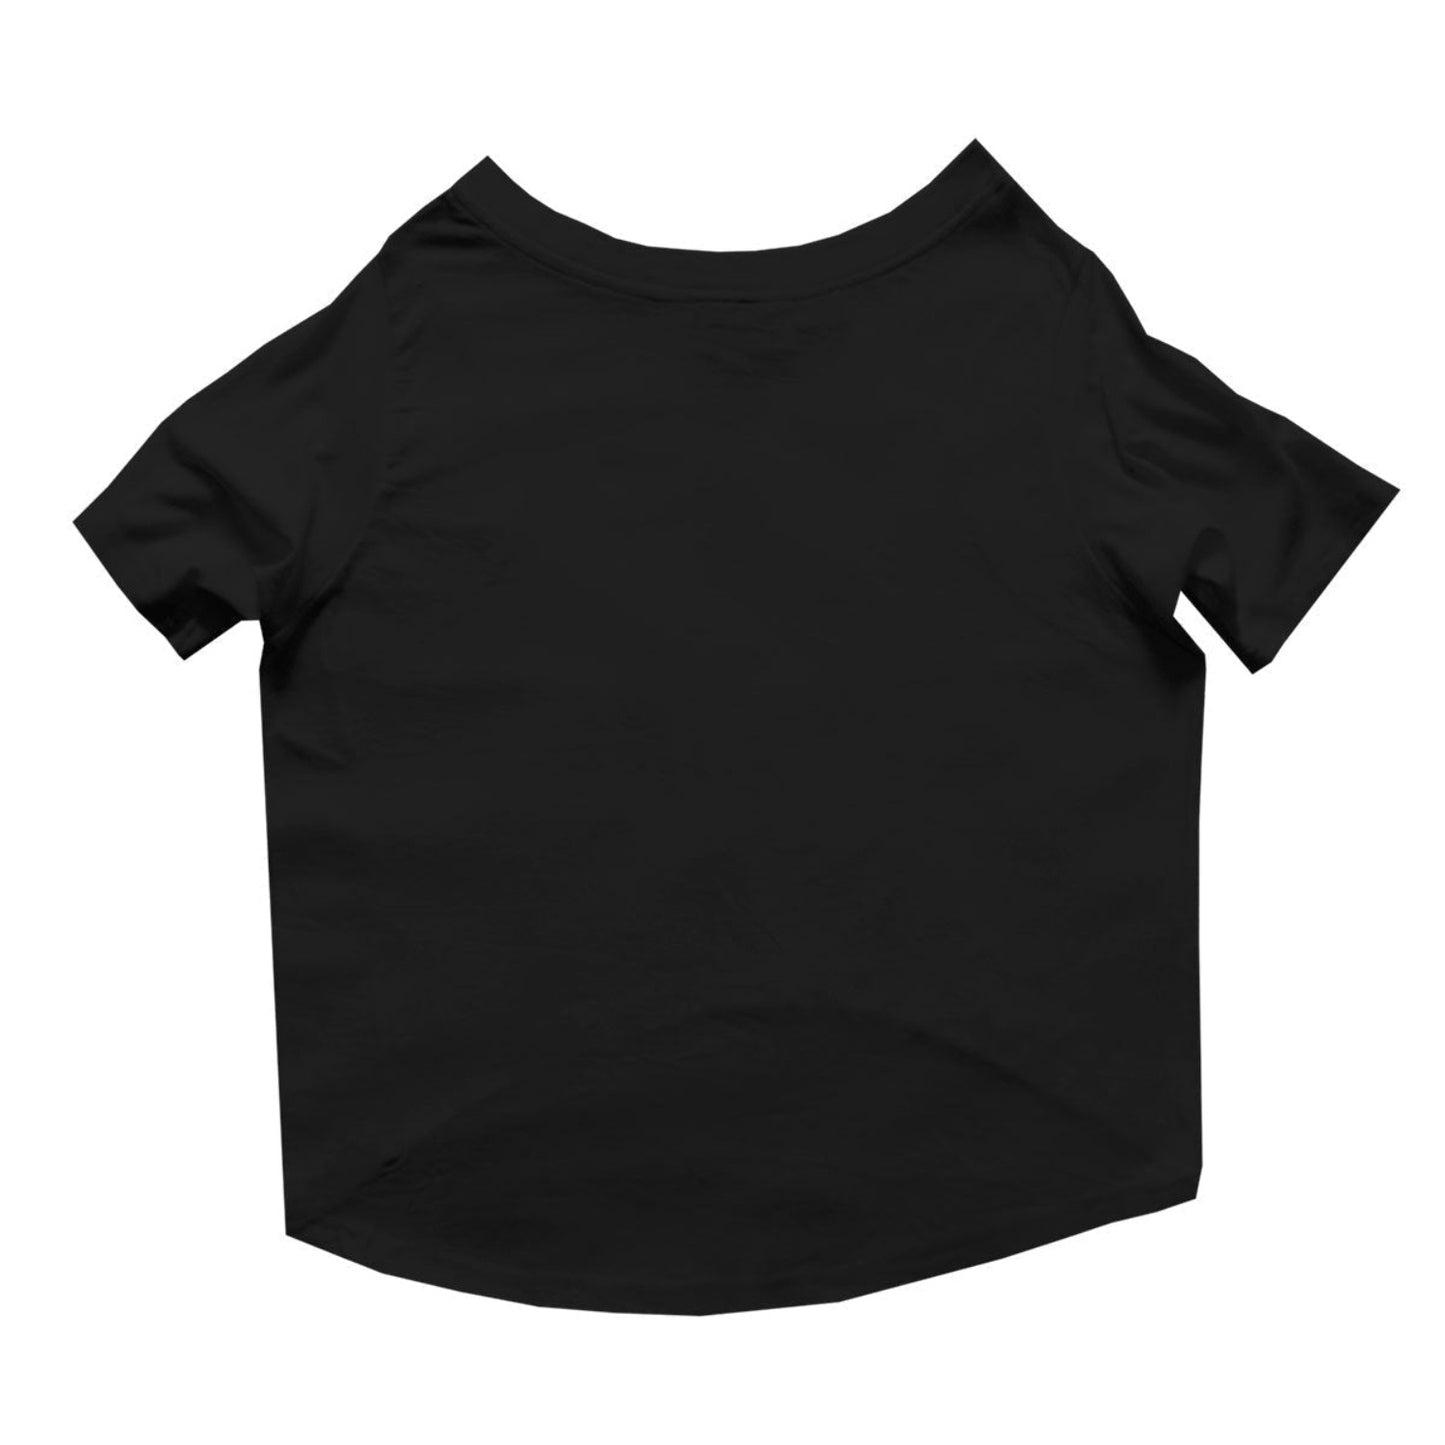 Ruse  / Black Ruse Basic Crew Neck "I'm Too Old for this Sh*t" Printed Half Sleeves Dog Tee23